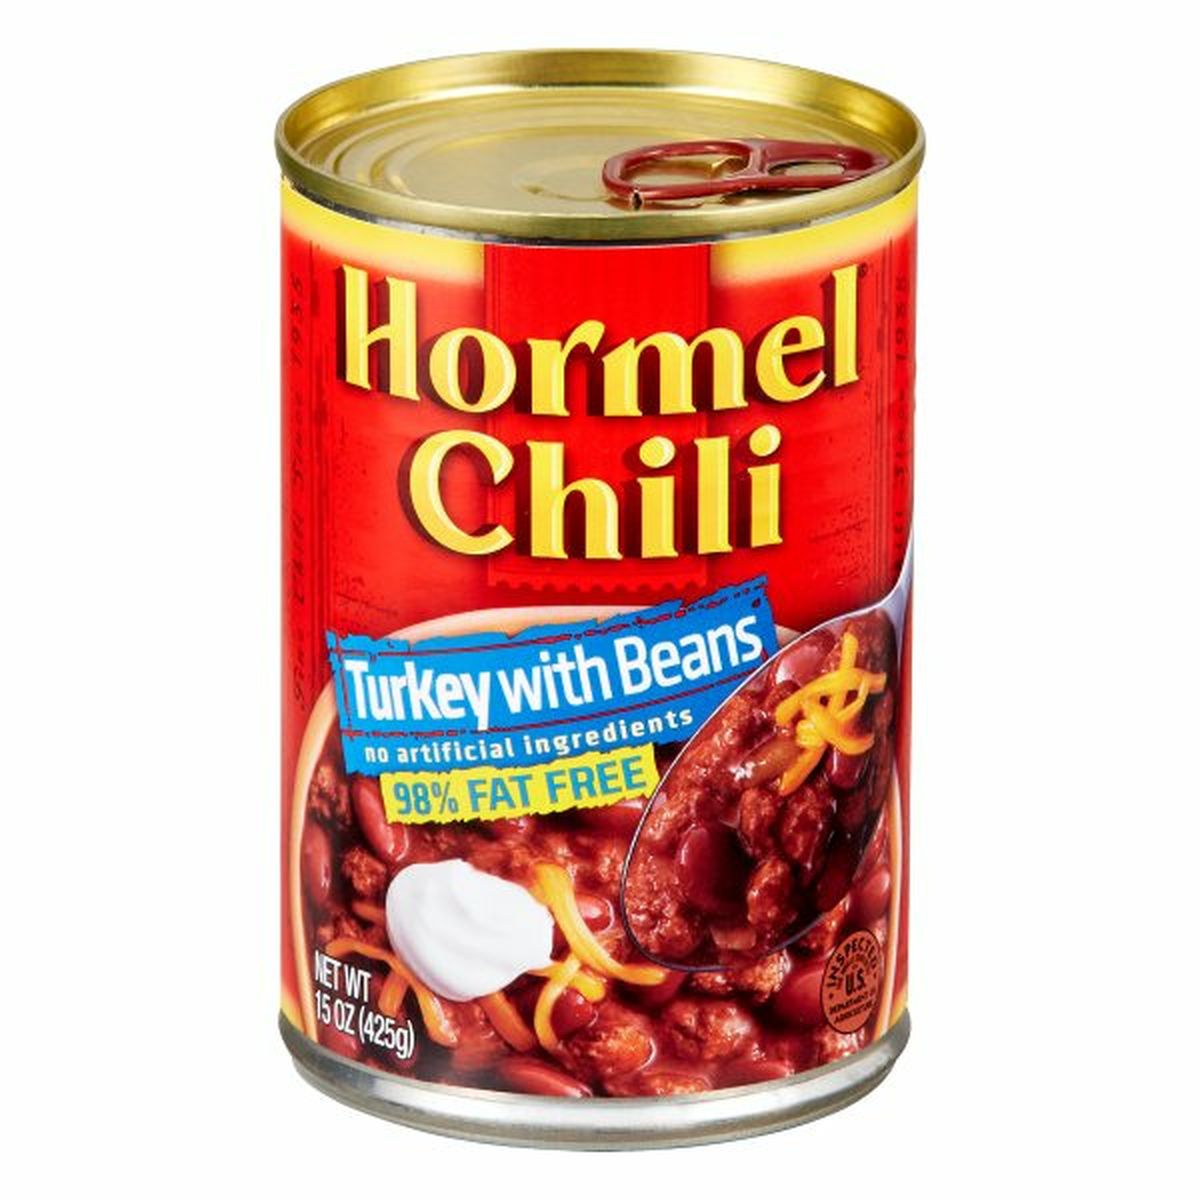 Calories in Hormel Turkey with Beans, Chili